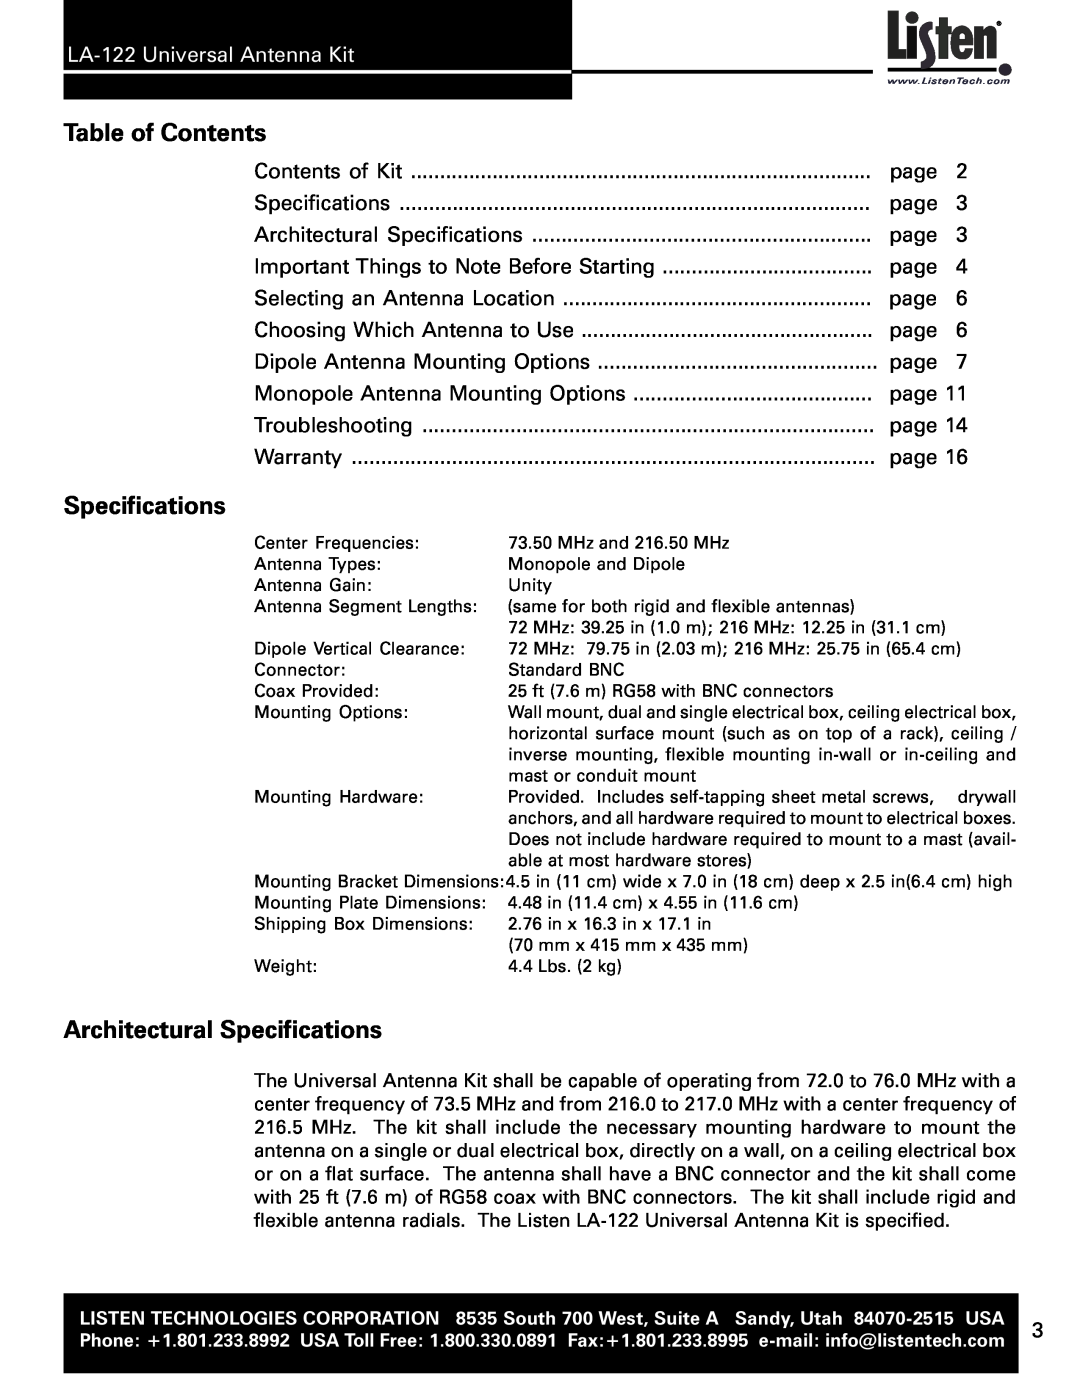 Listen Technologies user manual Table of Contents, Architectural Specifications, LA-122Universal Antenna Kit 